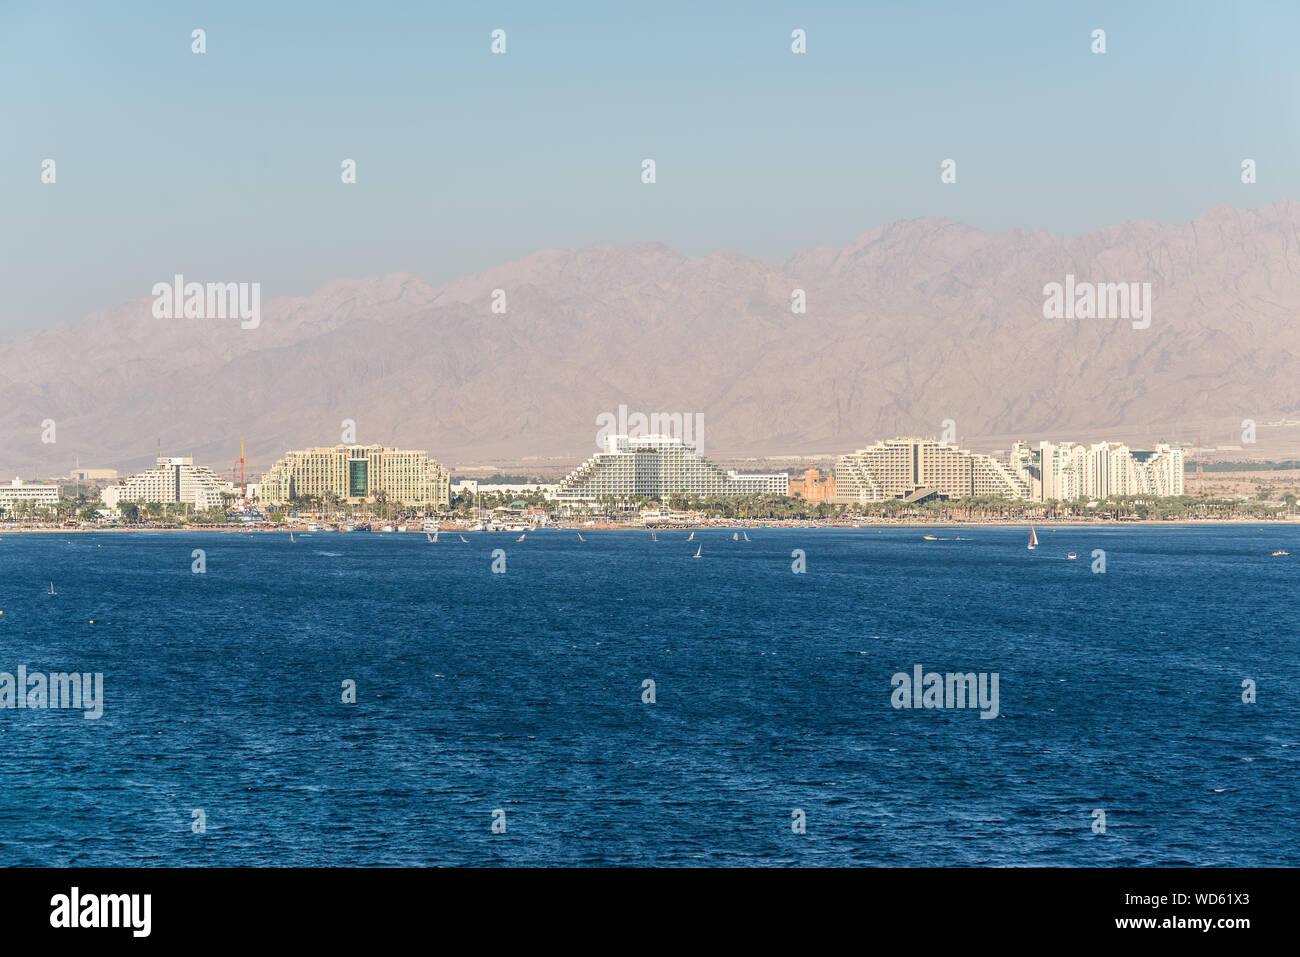 Eilat, Israel - November 7, 2017:  View from cargo port on Eilat city - famous tourist and resort place in Israel. Stock Photo